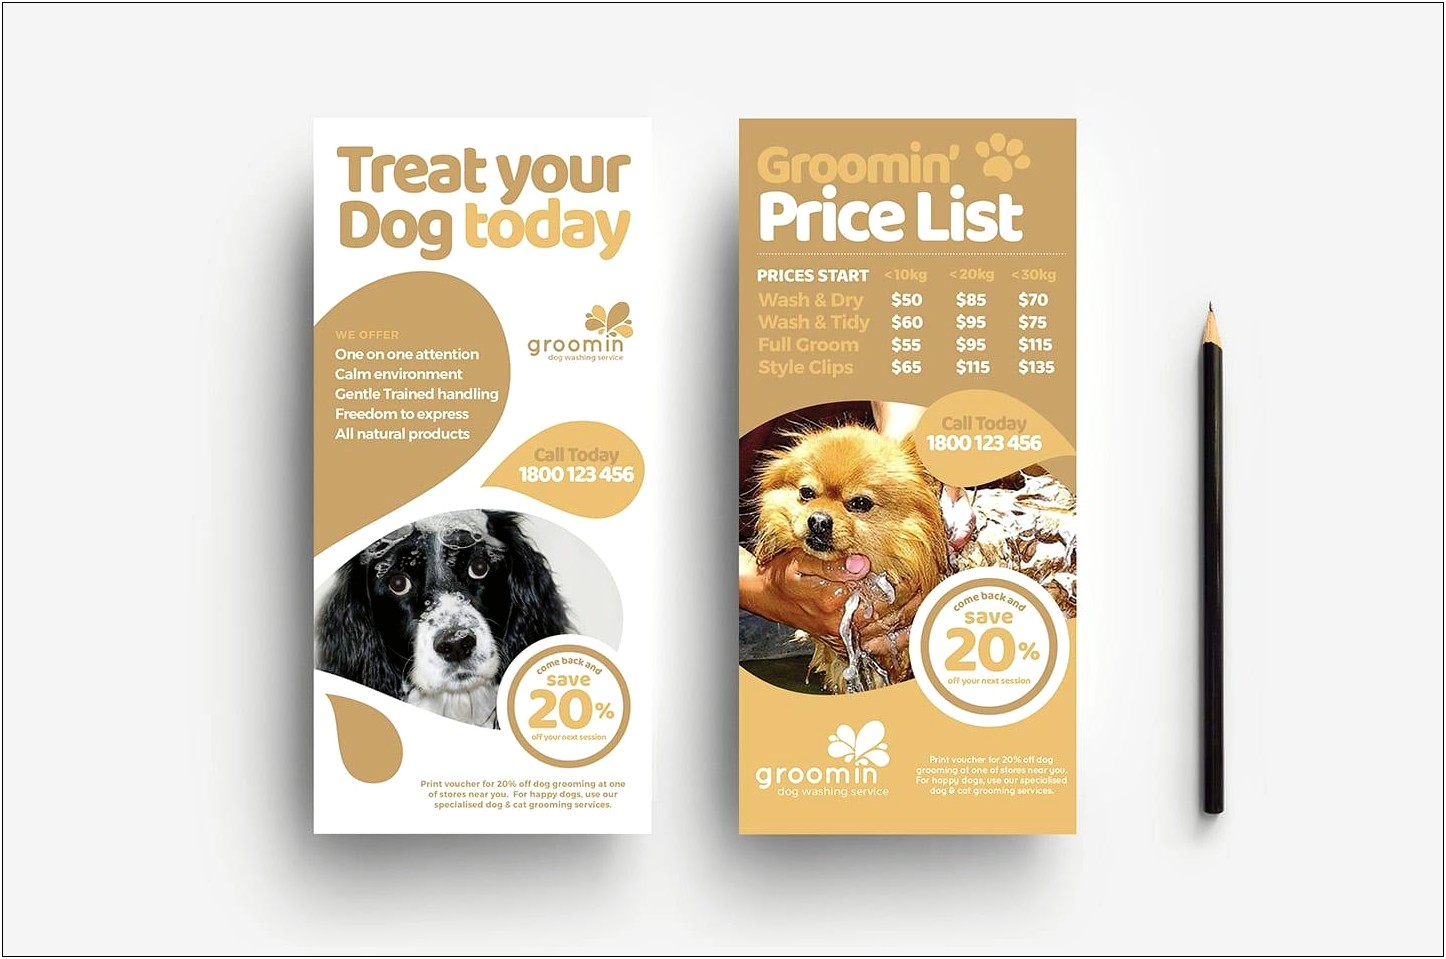 Free Puppies For Sale Flyer Template